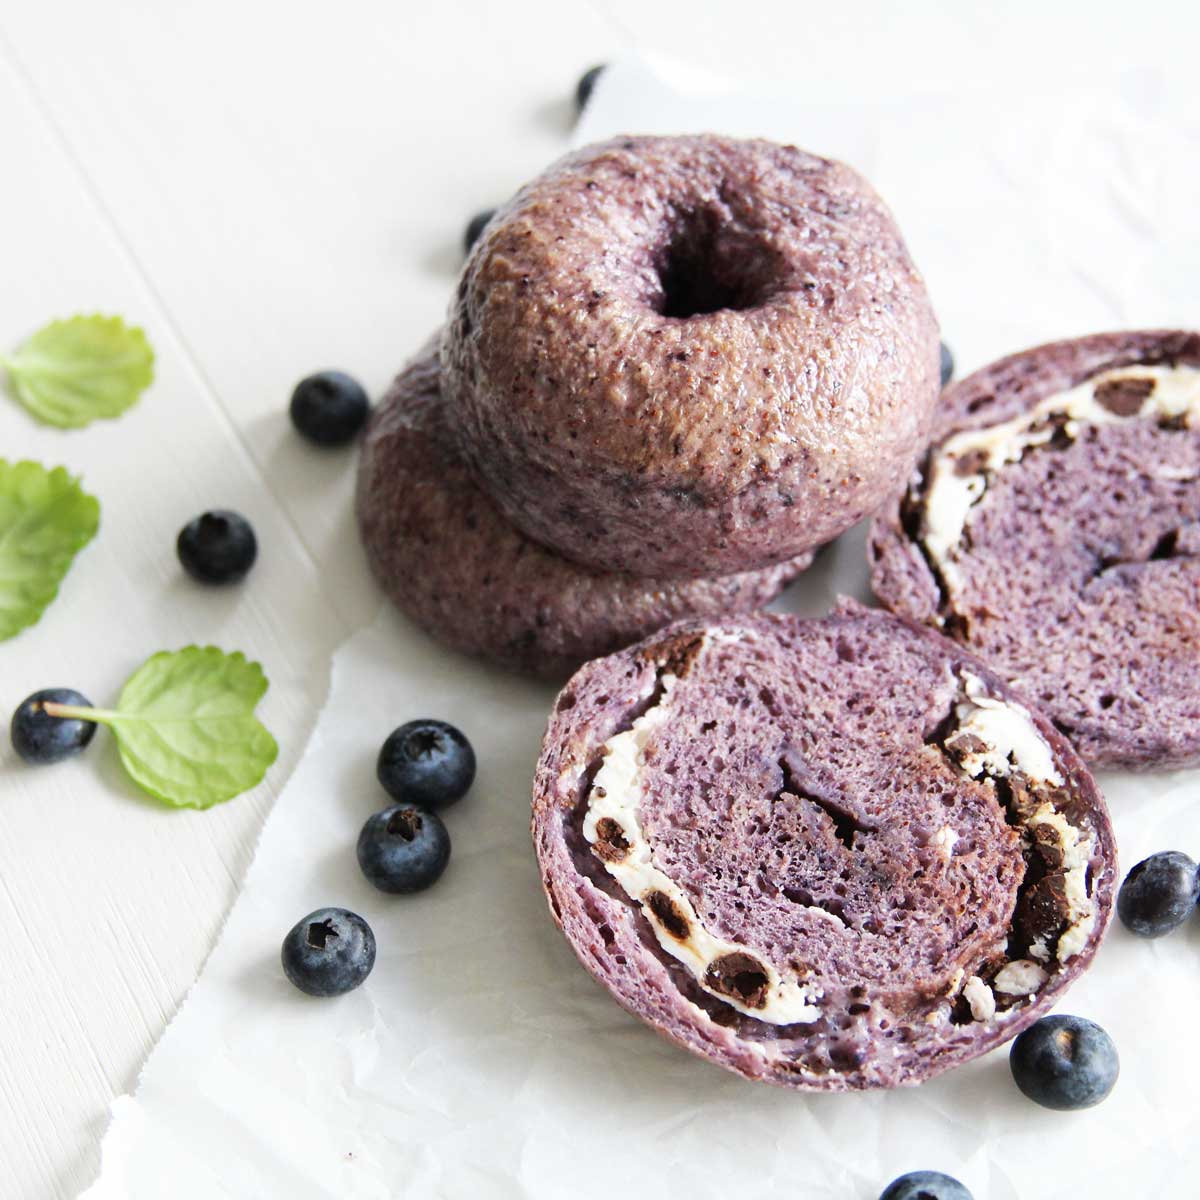 Chocolate Chip Blueberry Bagels (Easy, Cream Cheese Stuffed Bagel Recipe) - Red Bean Mochi Cake